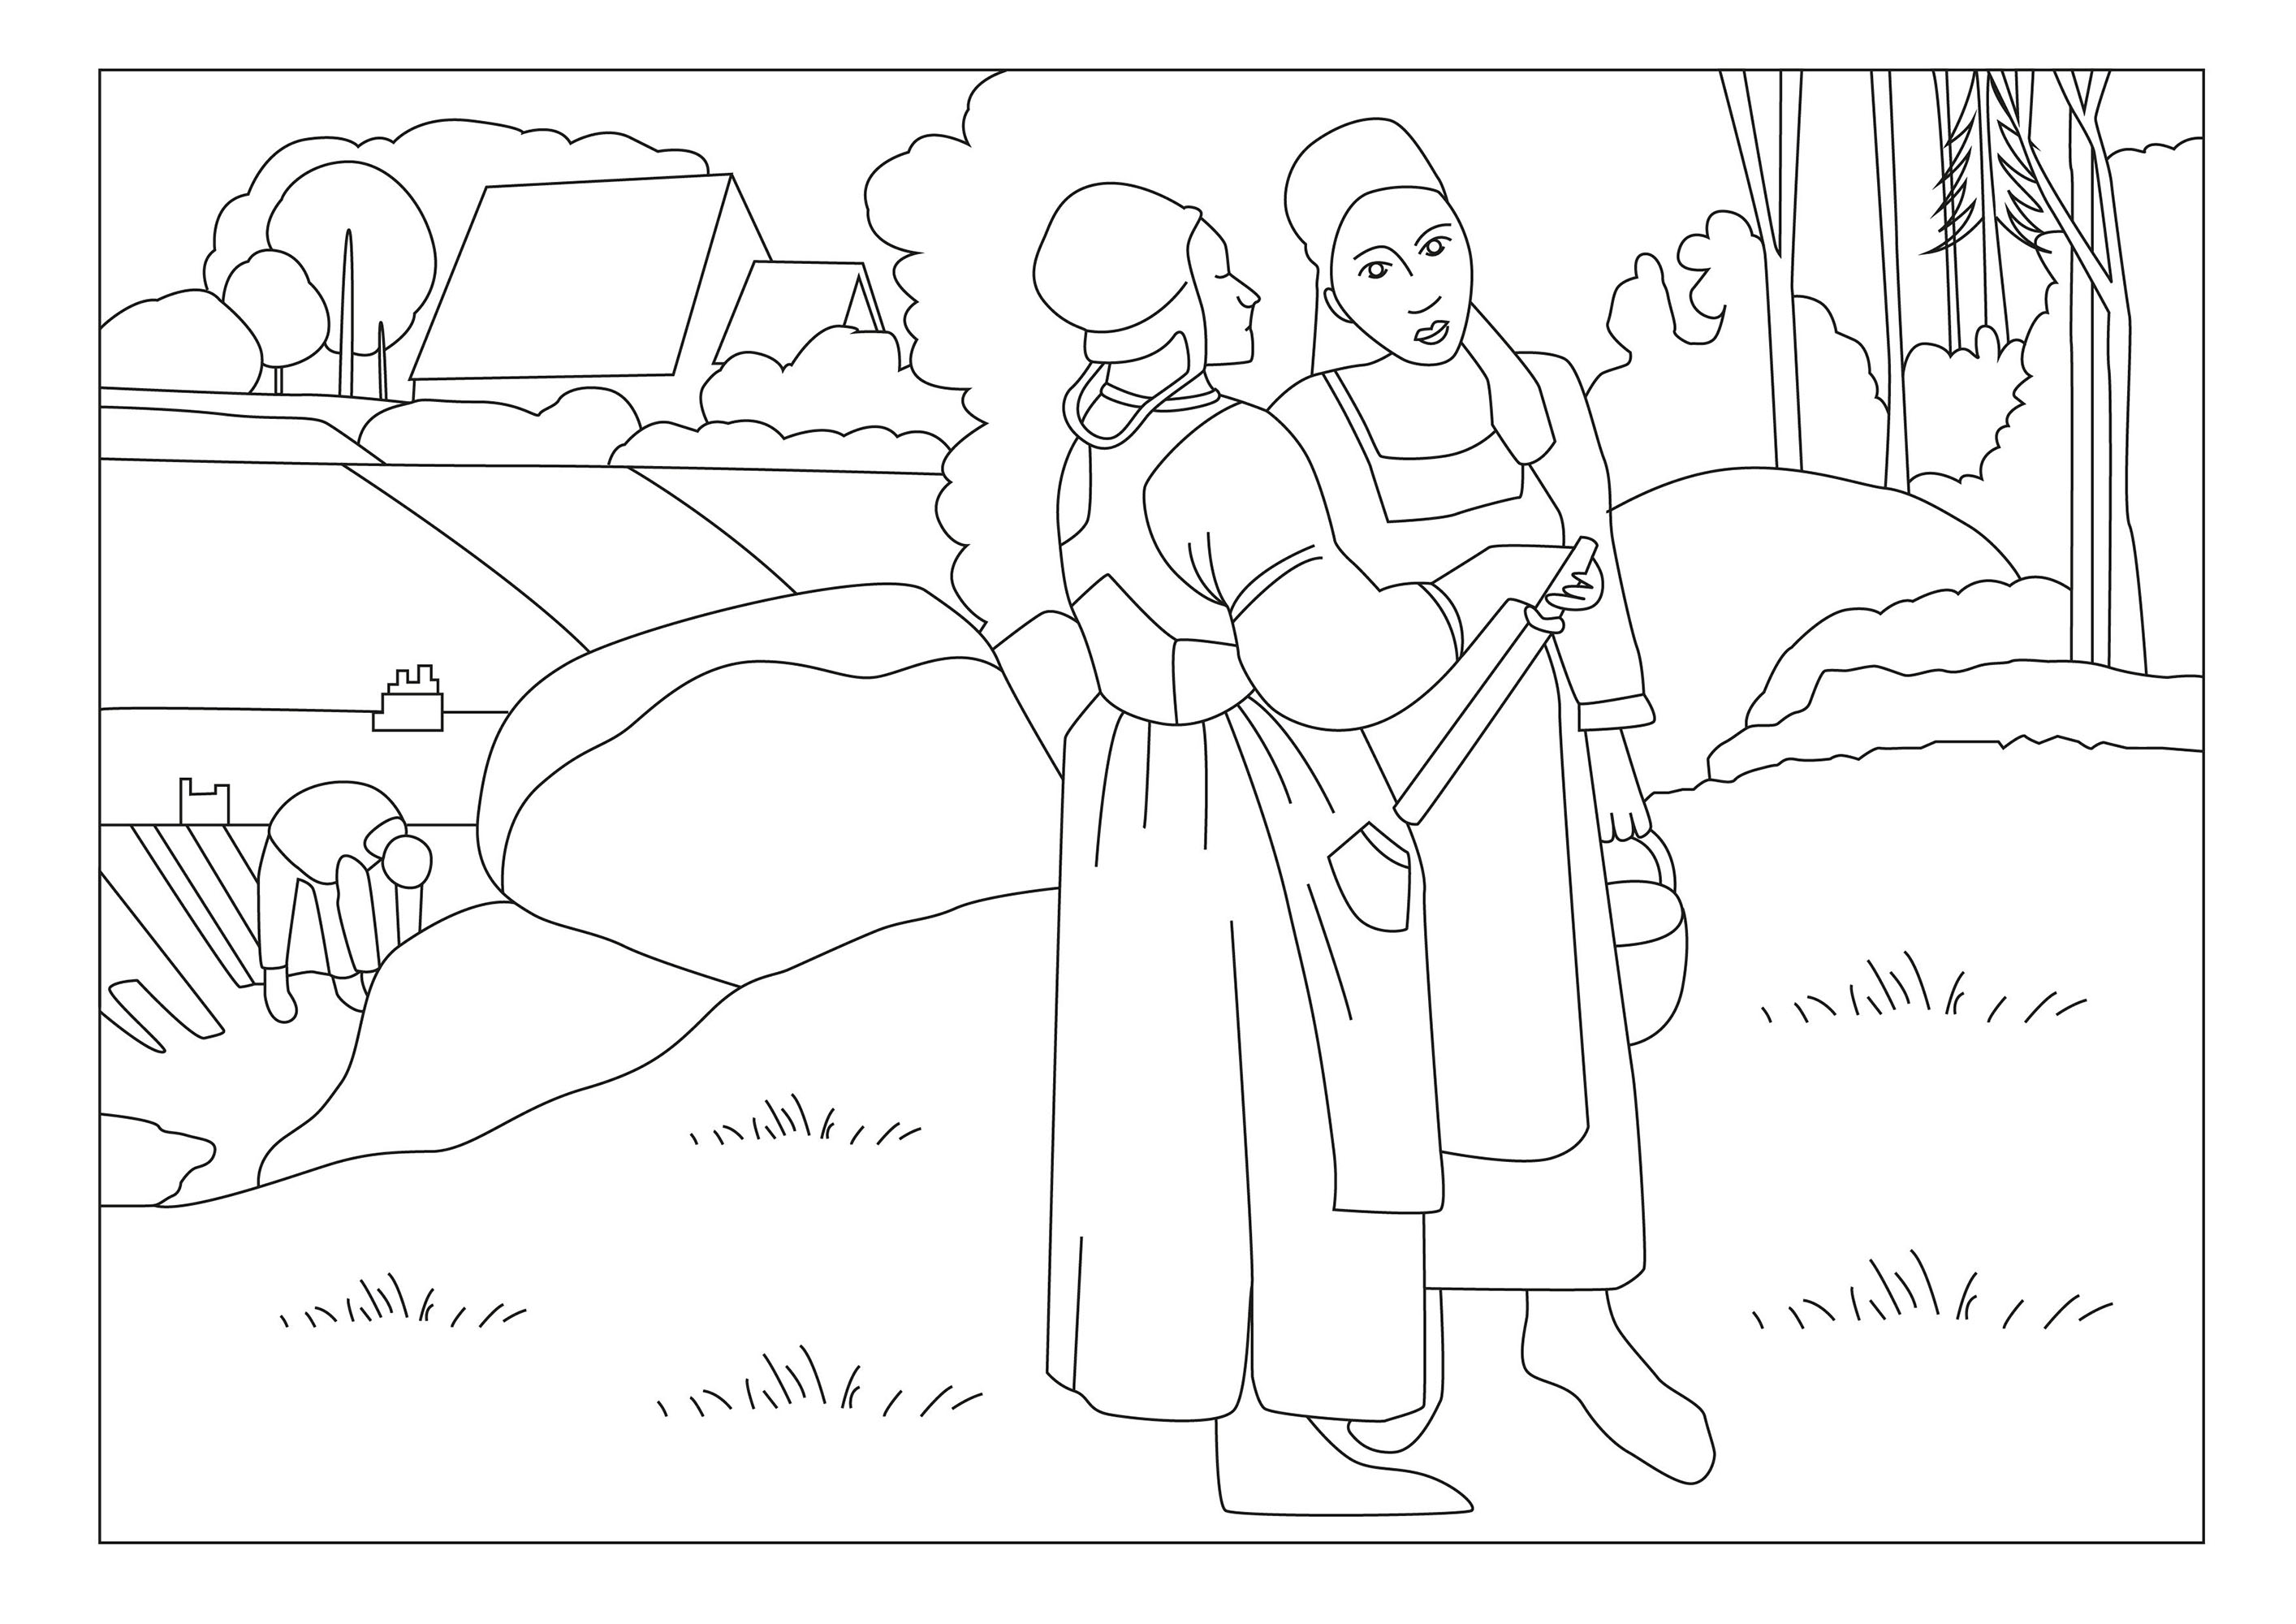 Coloring based on the painting Paysannes bretonnes (1894) by Paul Gauguin. This coloring page features two Breton peasant women in traditional costume, seated in front of a verdant landscape.Paul Gauguin's precise, delicate strokes have been faithfully reproduced in this coloring, offering a true immersion in his unique, recognizable style, Artist : Gaelle Picard